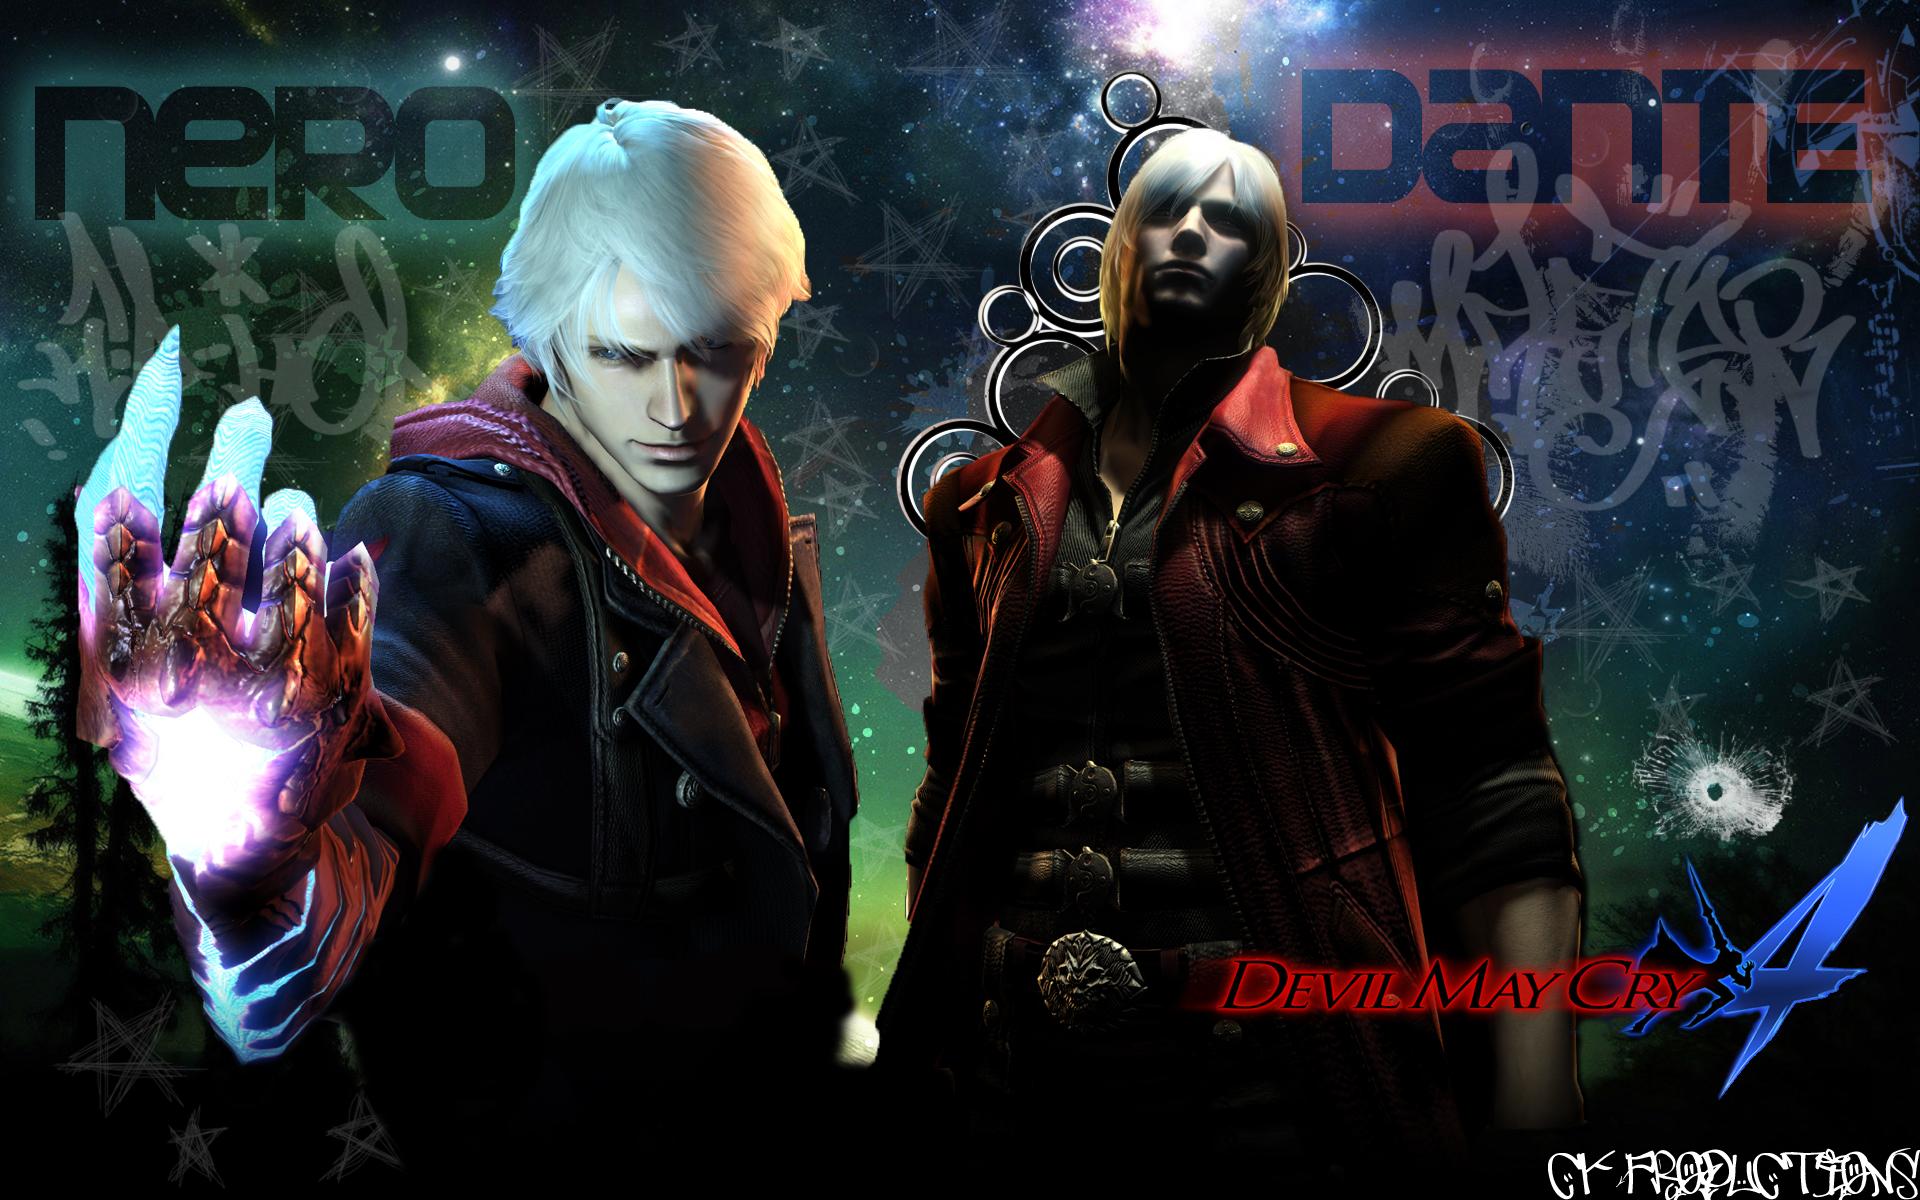 Devil may cry 4 on Pinterest Devil May Cry, Deviantart and Devil